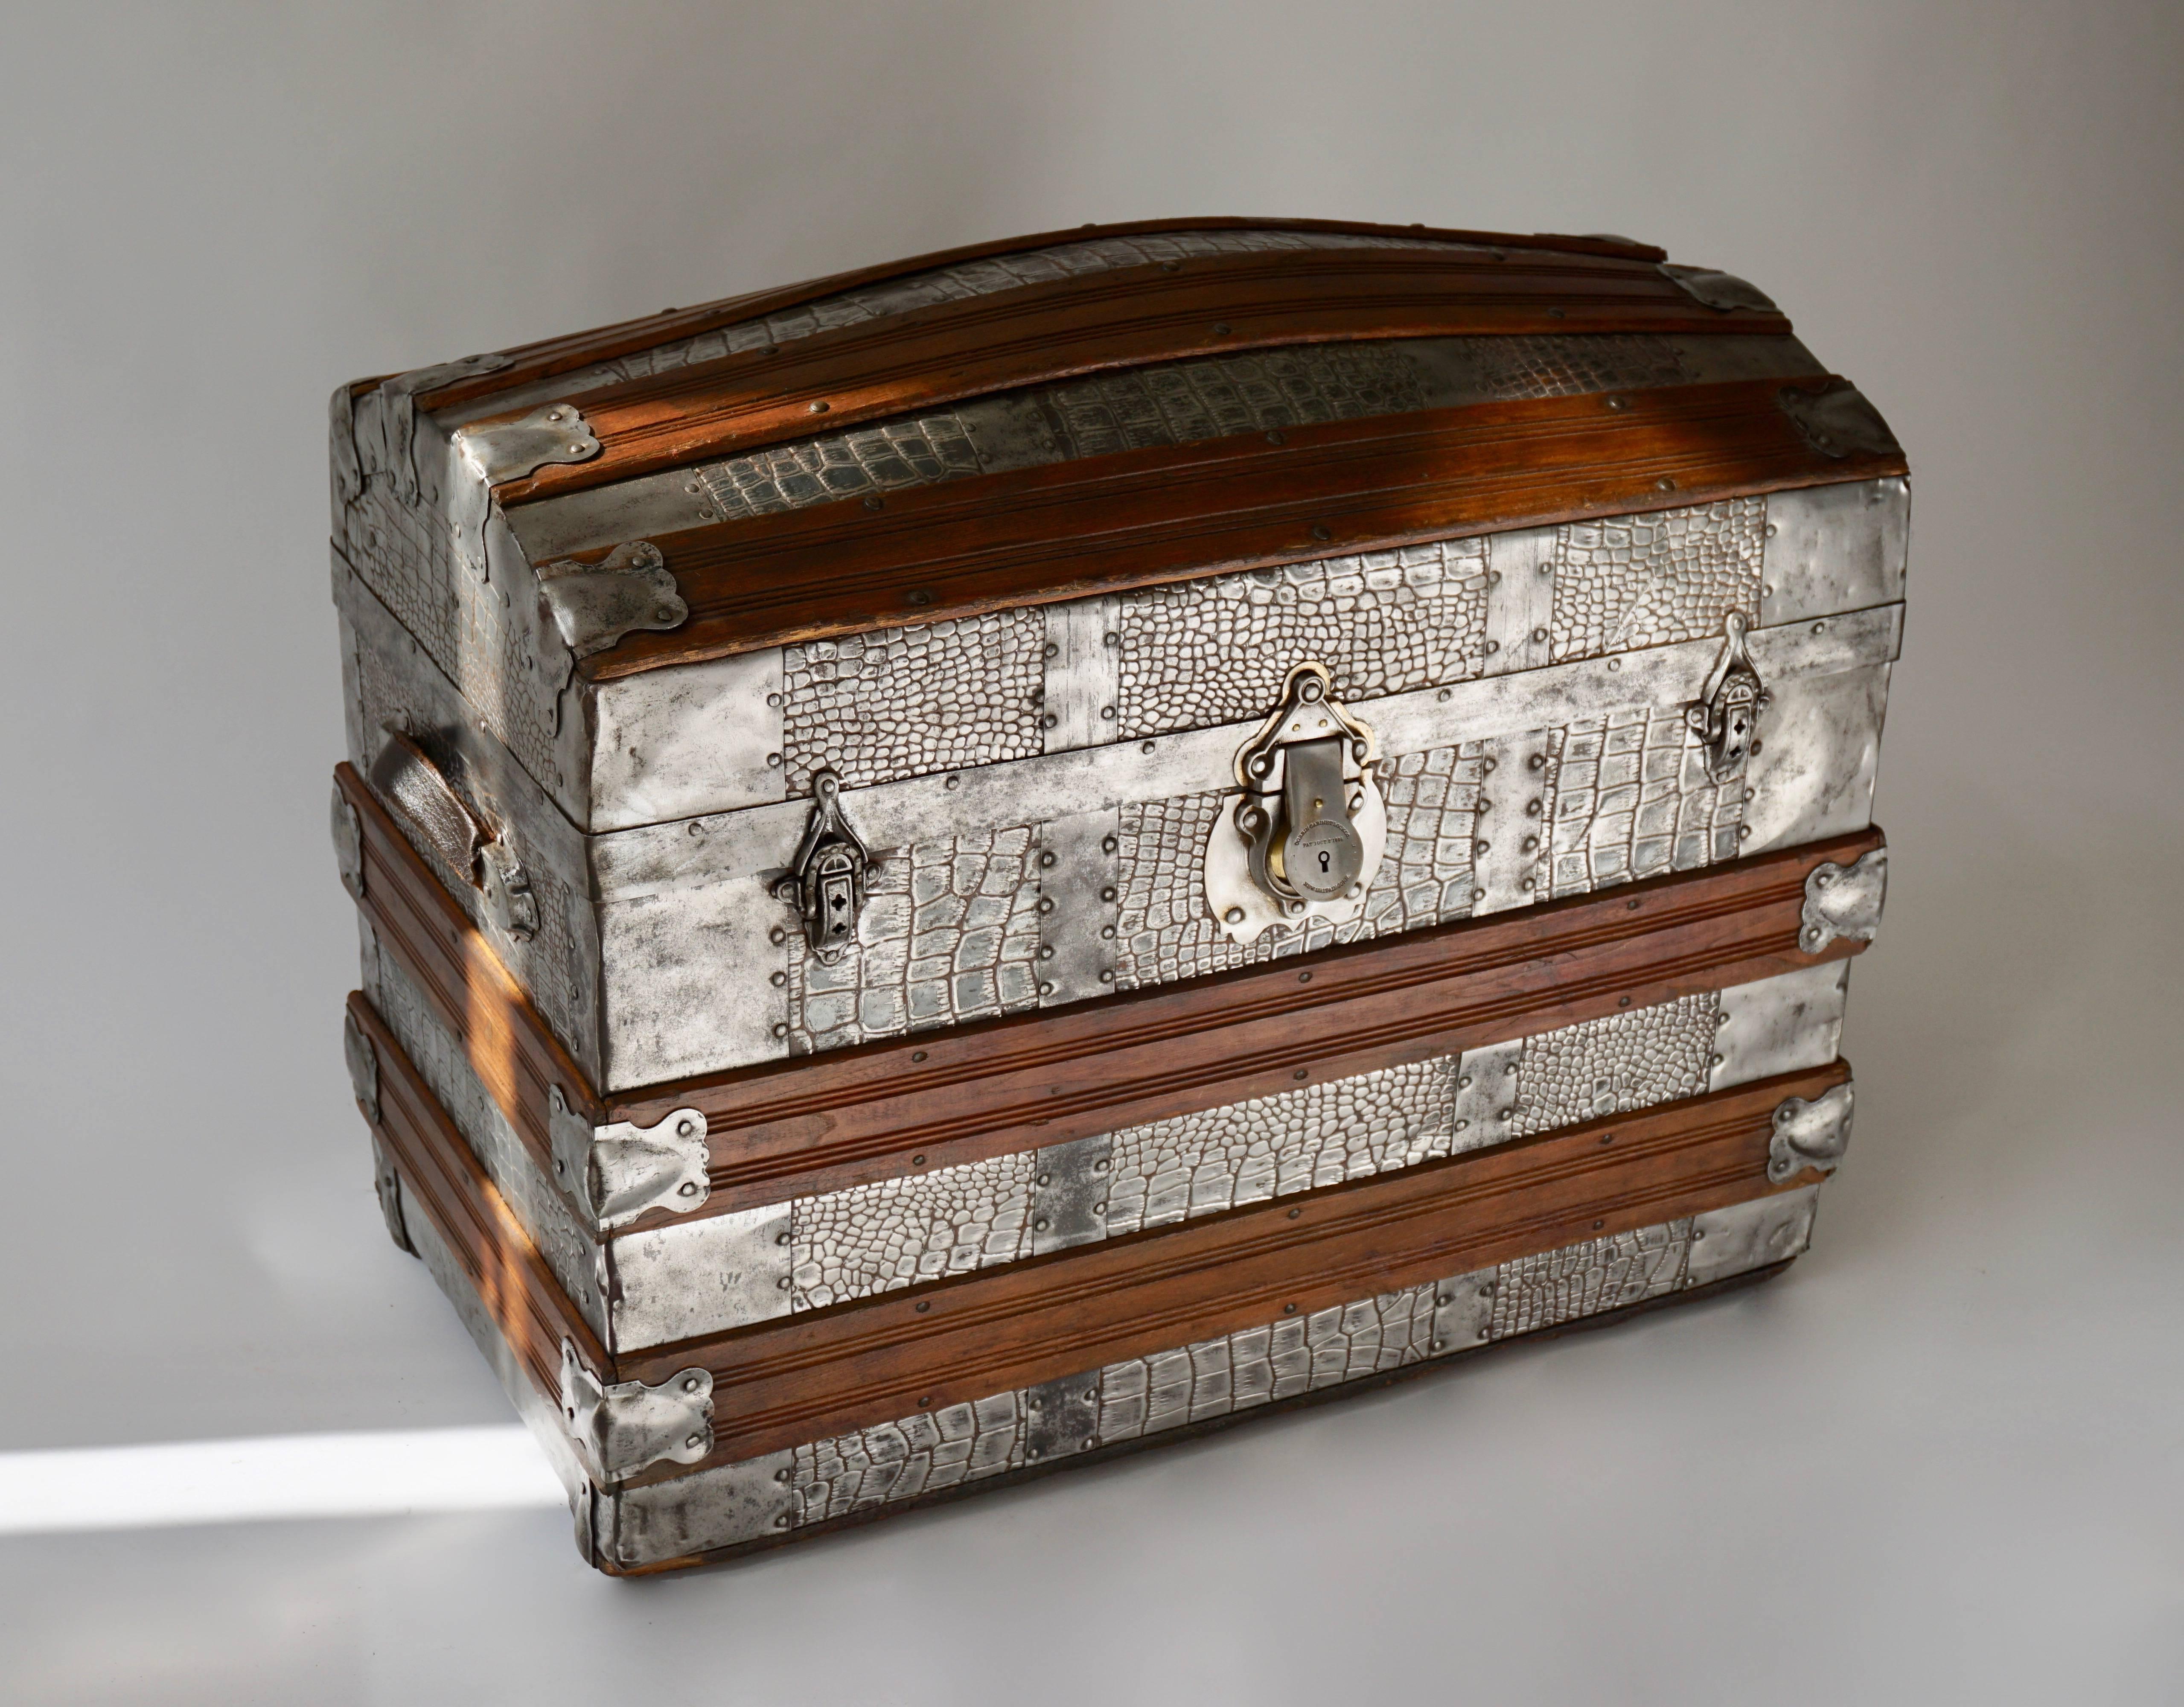 A highly unusual small size travelling trunk with fitted interior, the outside reinforced with studded metal crocodile skin pattern plates and secured with a patented Corbin Cabinet lock from the New Britain Company of Connecticut, USA. America,